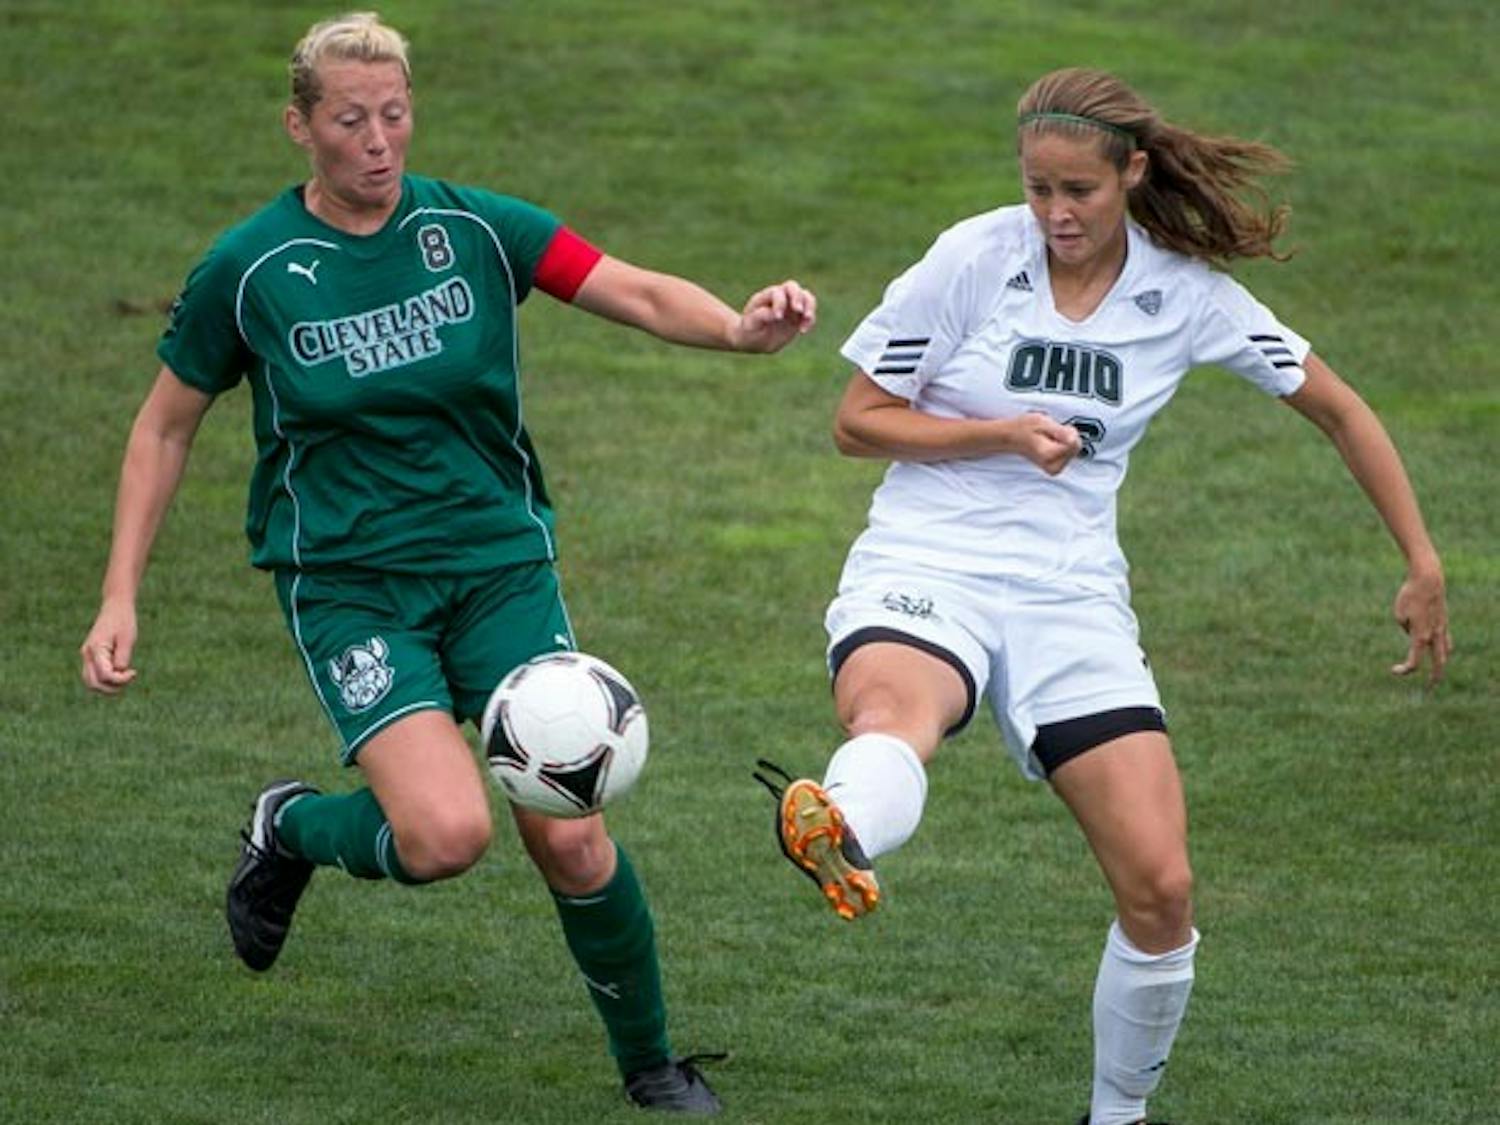 Soccer: Ohio to face Youngstown State for first time since '98  